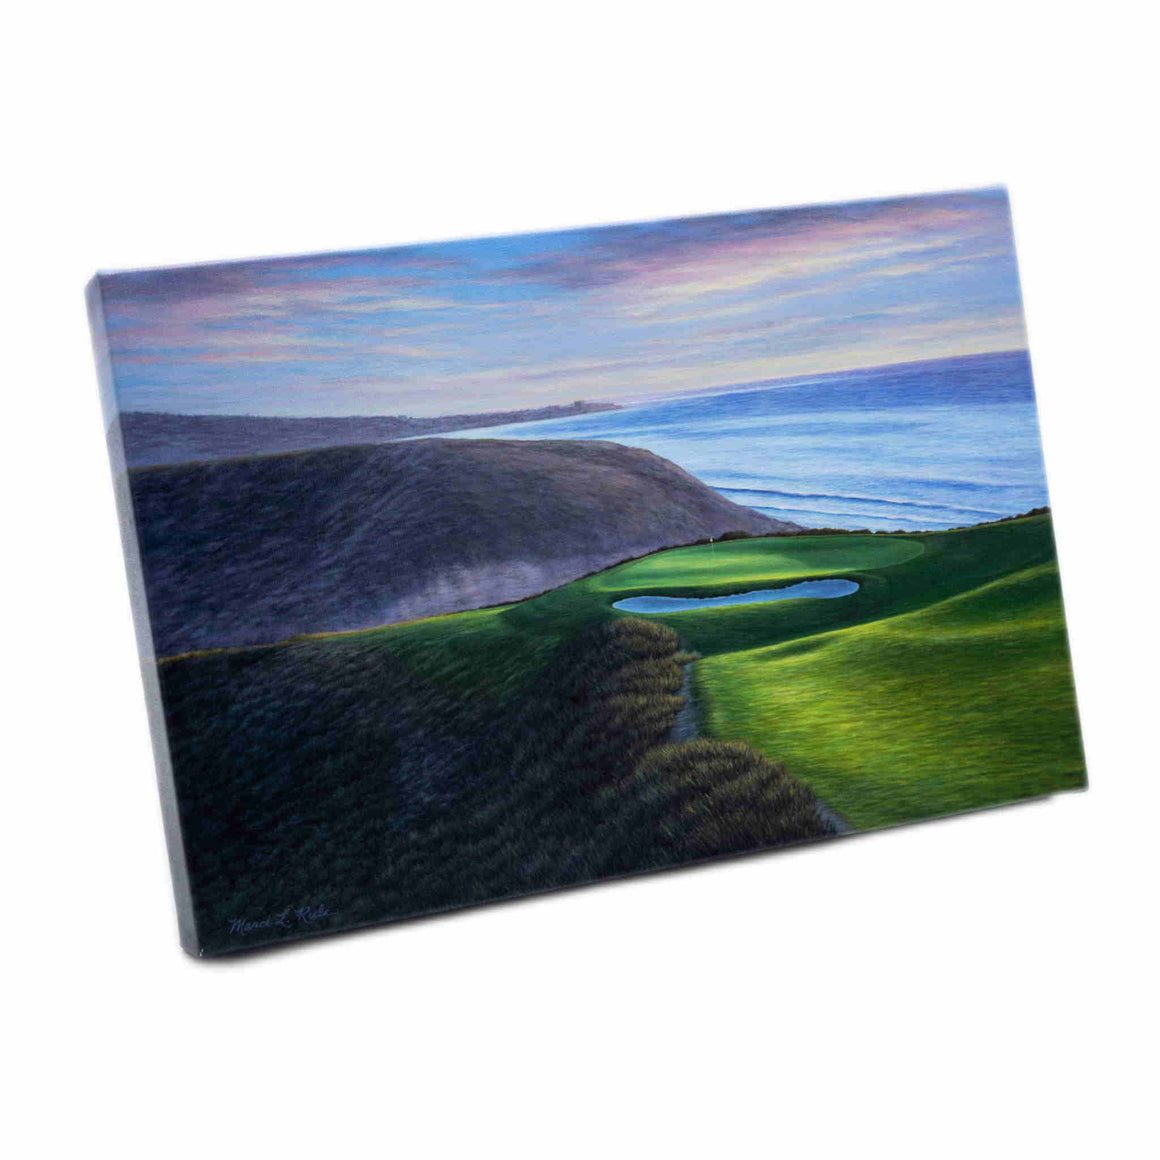 Torrey Pines 3rd Hole, South Course by Marci Rule oil painting on canvas.